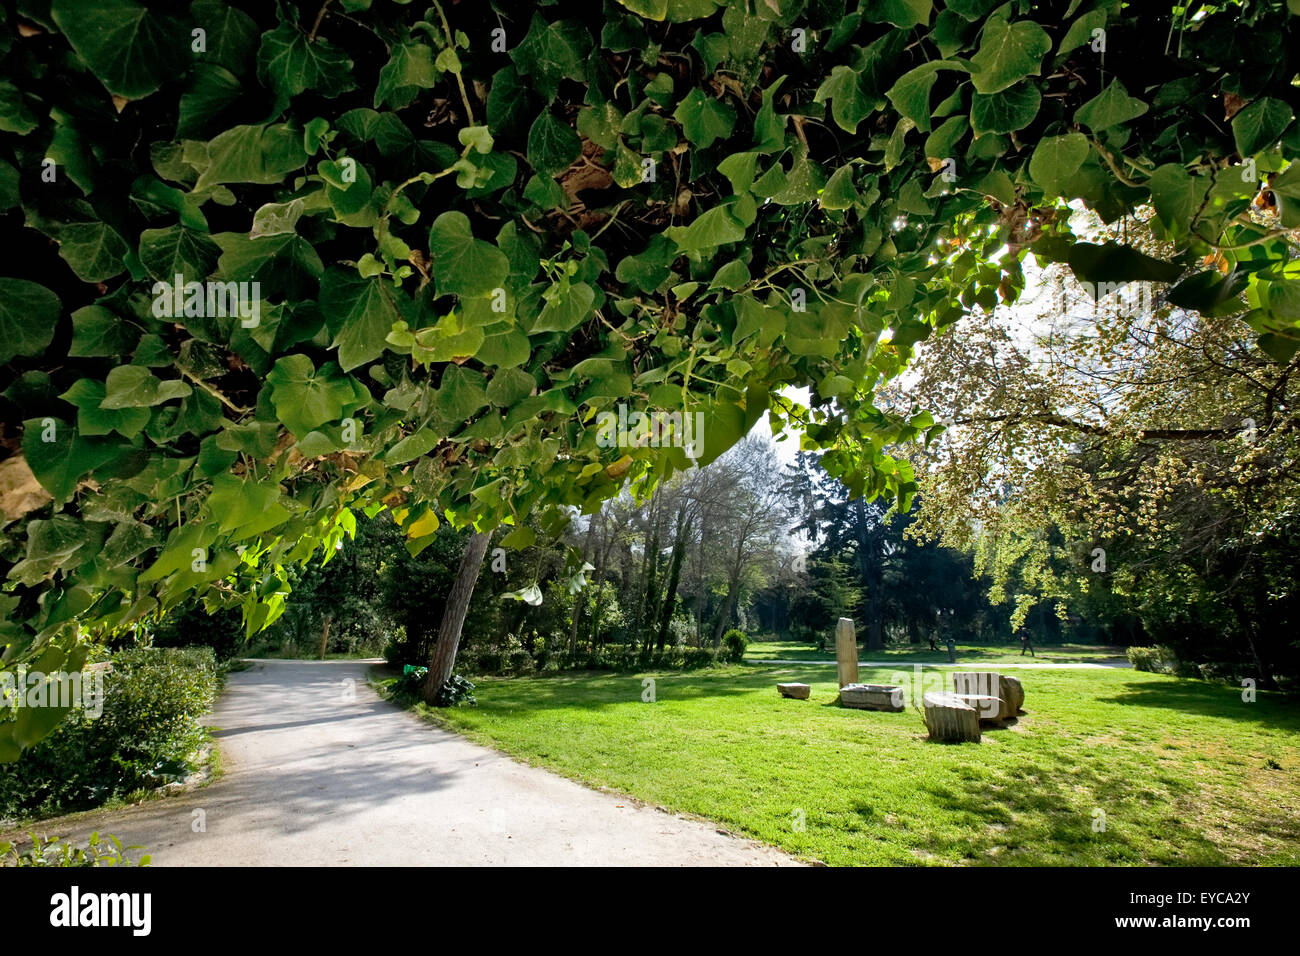 Corinthian marbles laying on the green park surrounded by foliage in National gardens of Athens. Syntagma. Greece Stock Photo